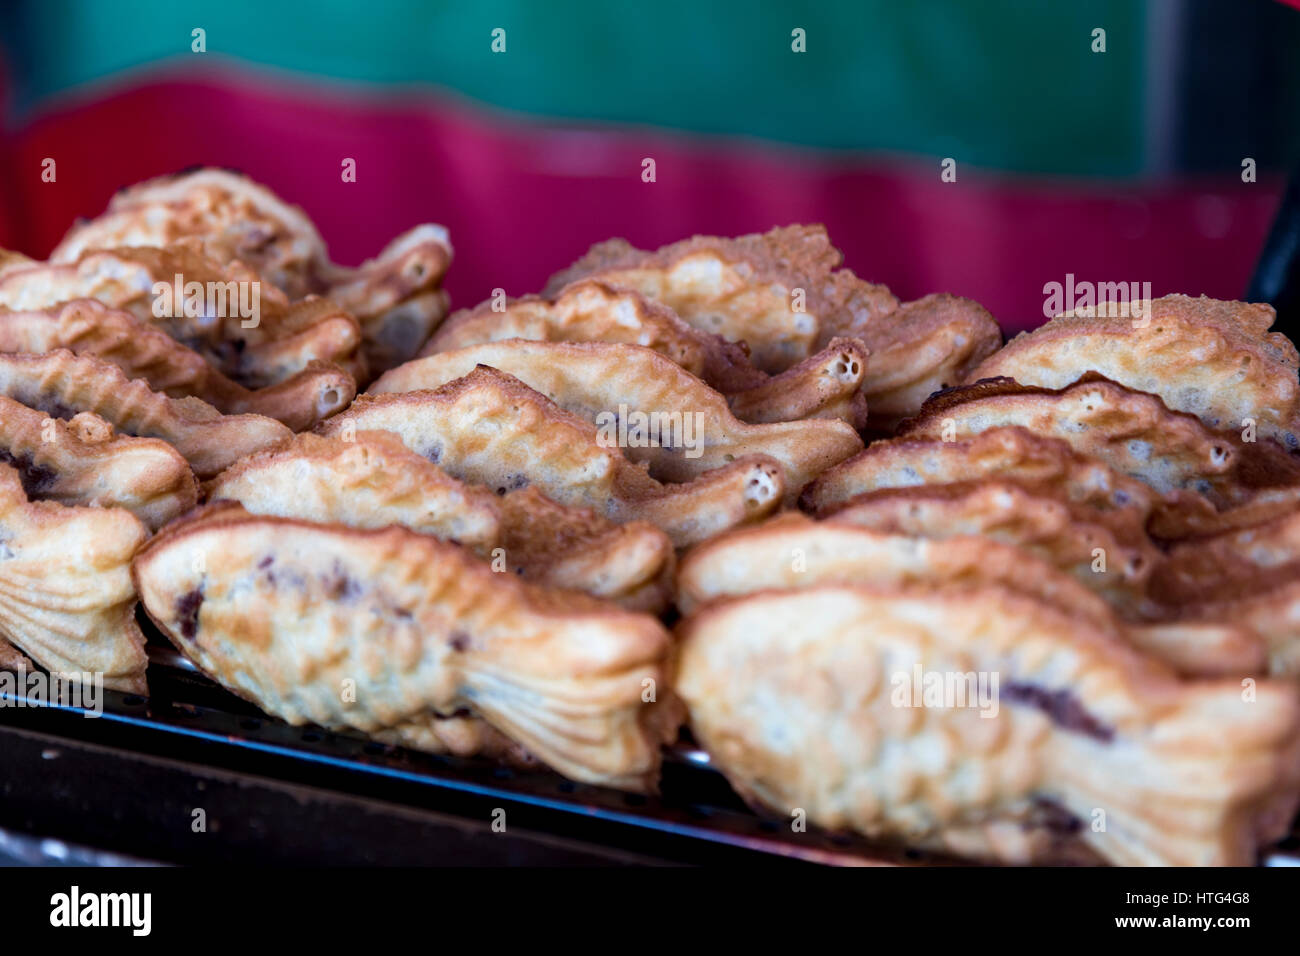 very famous street food in south korea : fish shaped pancake filled in sweet red been. Stock Photo